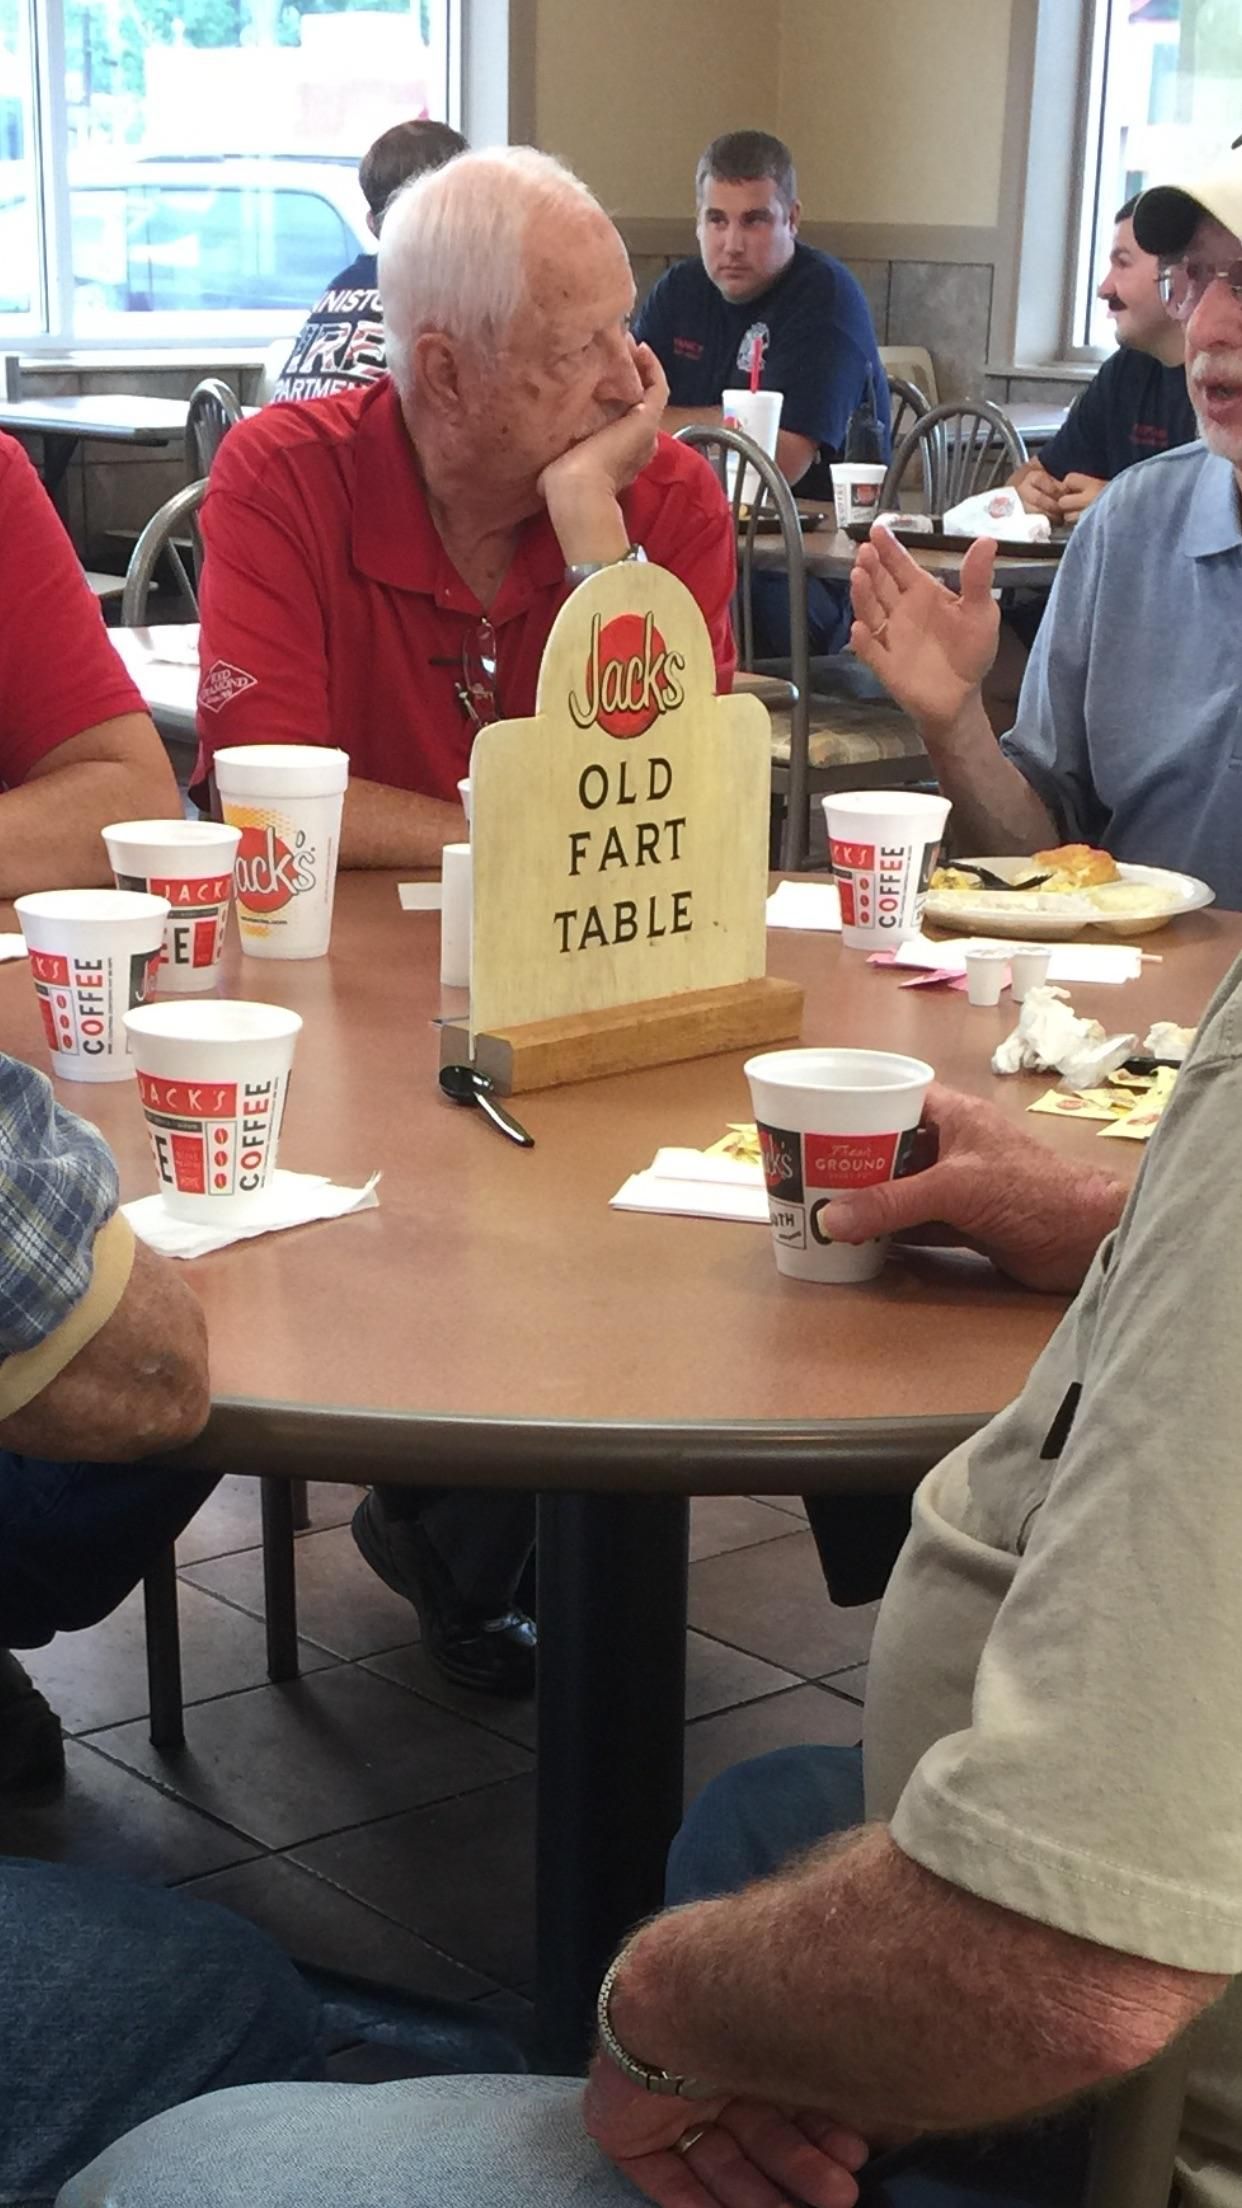 These guys sit at this table every morning. The restaurant owners made this sign to claim the table for them.